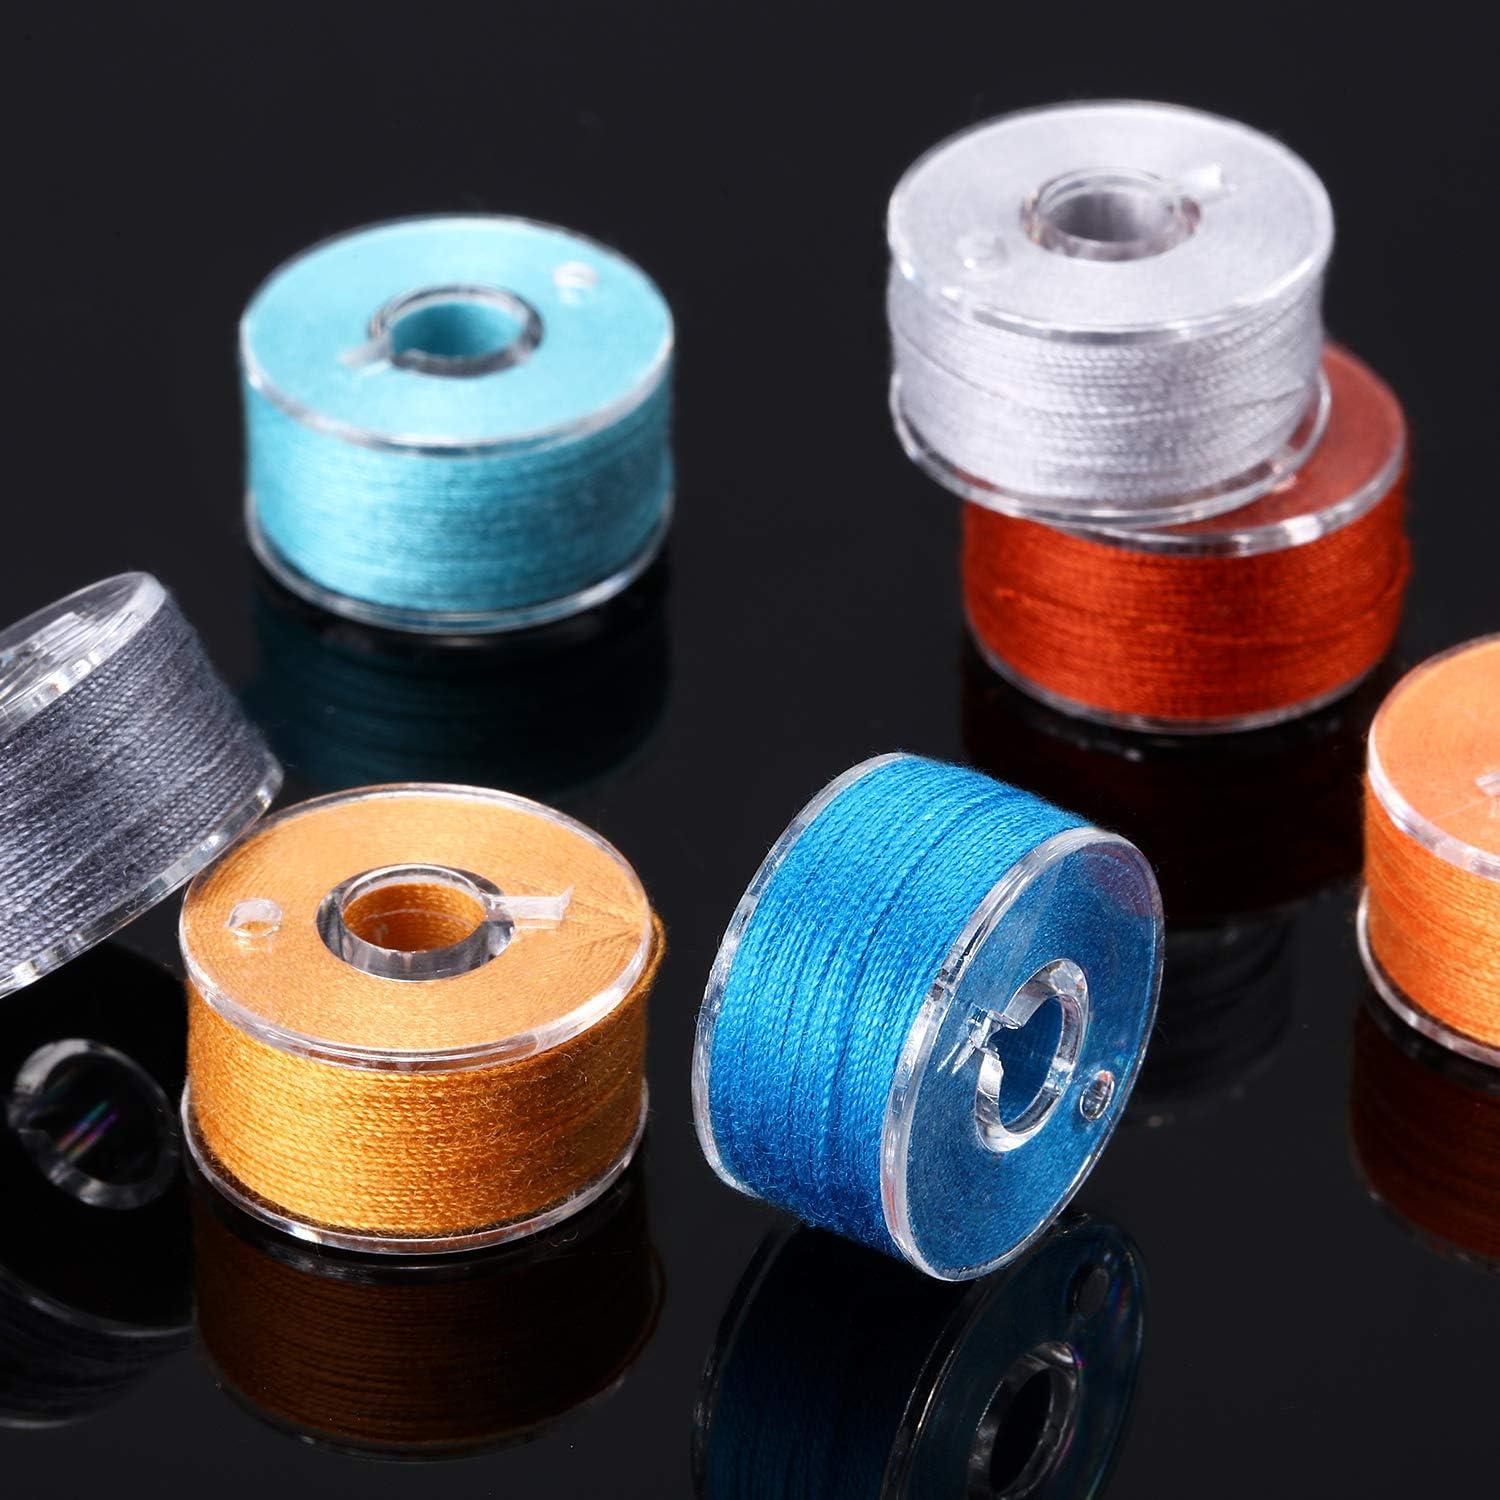 144 Pieces Prewound Bobbins Sewing Thread Bobbins Compatible with Brother/Babylock/Janome/Elna/Singer  Embroidery Machine, Size A (24 Colors)